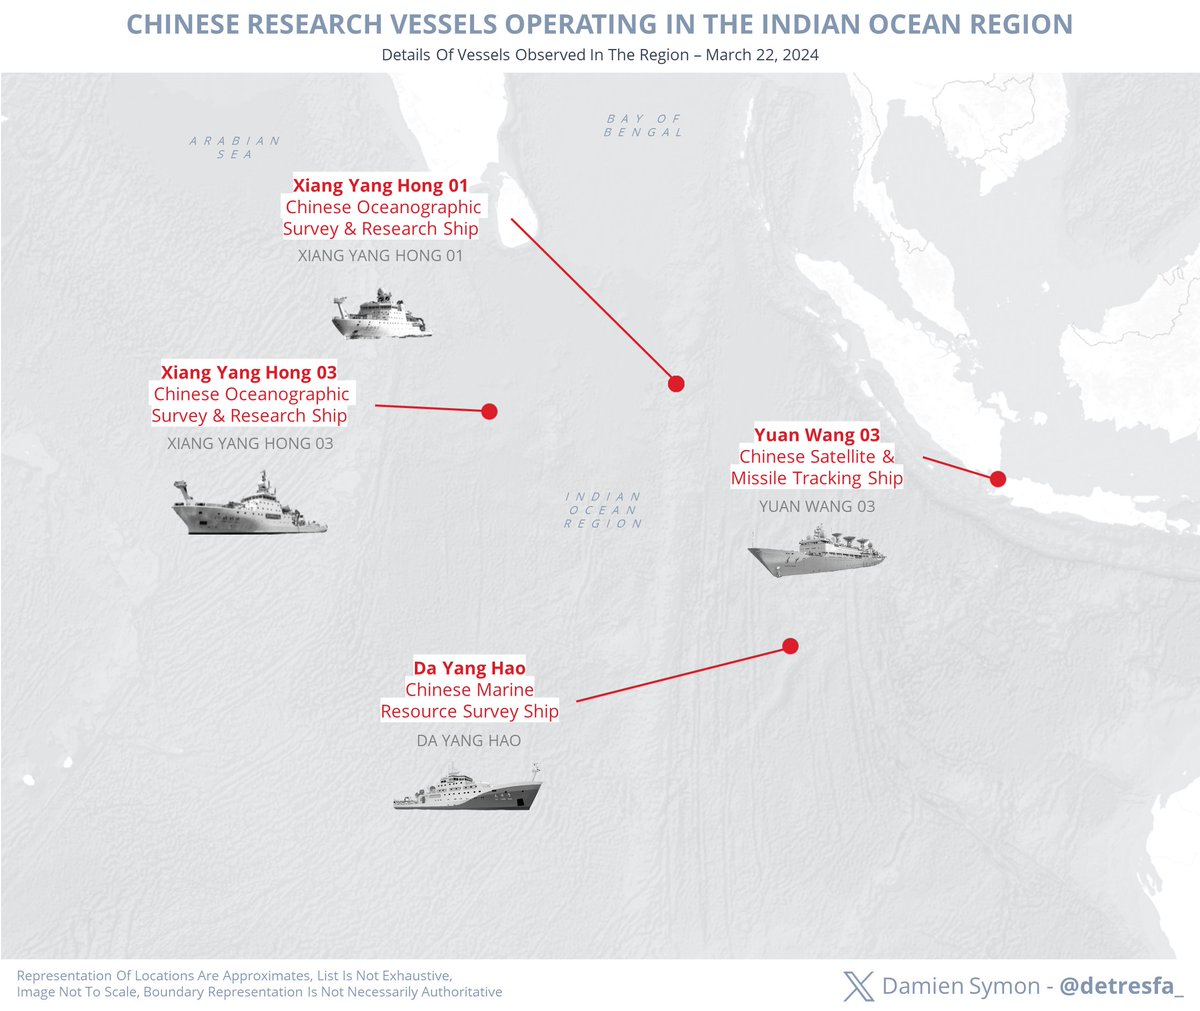 As Yuan Wang 03 - a Chinese state linked satellite & missile tracking vessel approaches the Indian Ocean, raising concerns in #India, here's a visual that shows other Chinese state linked research vessels operating in region right now